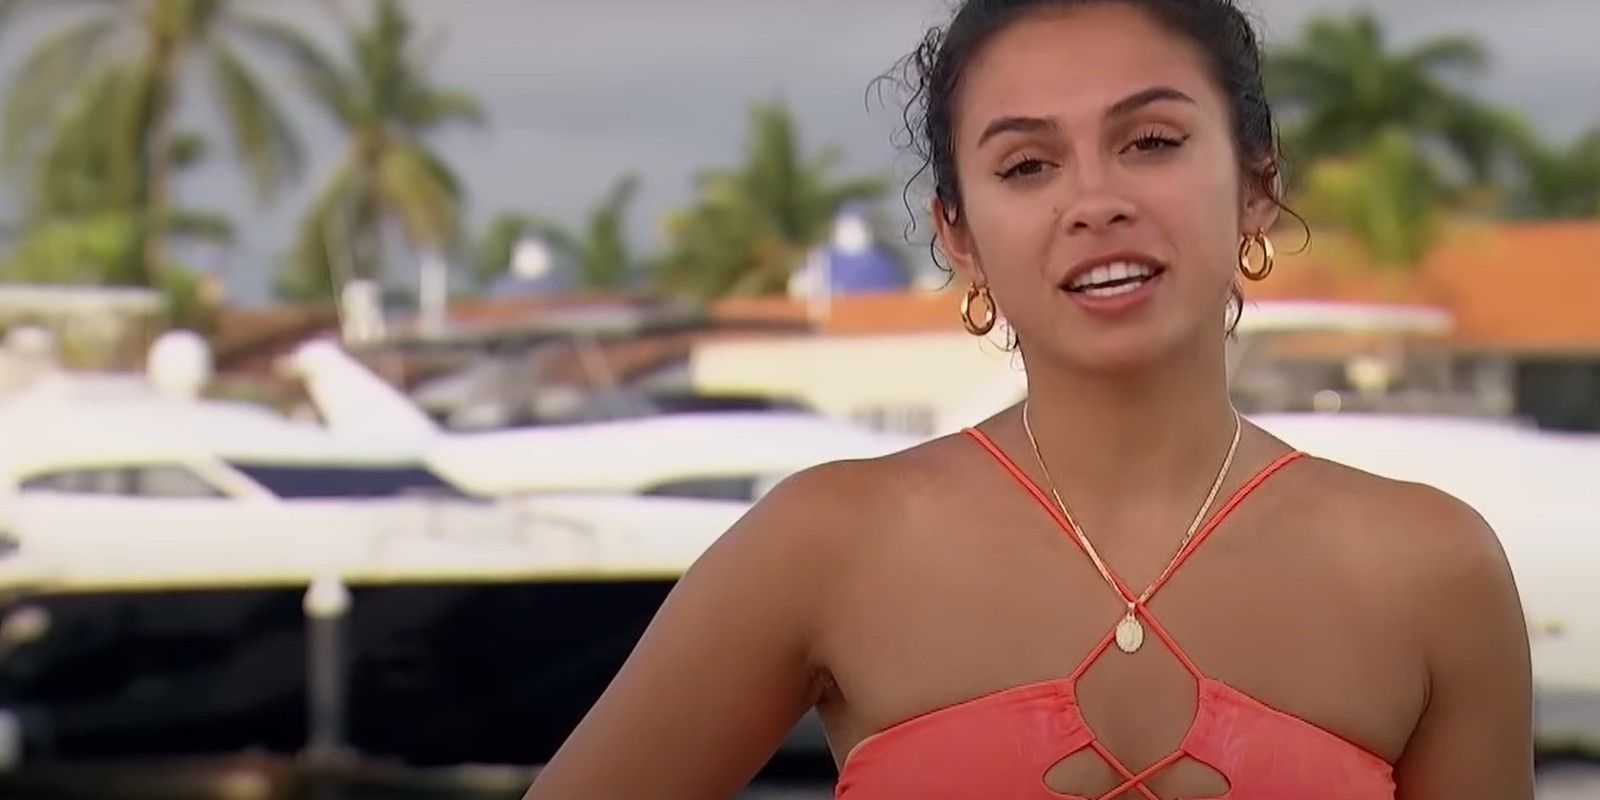 Brittany Galvin on Bachelor in Paradise